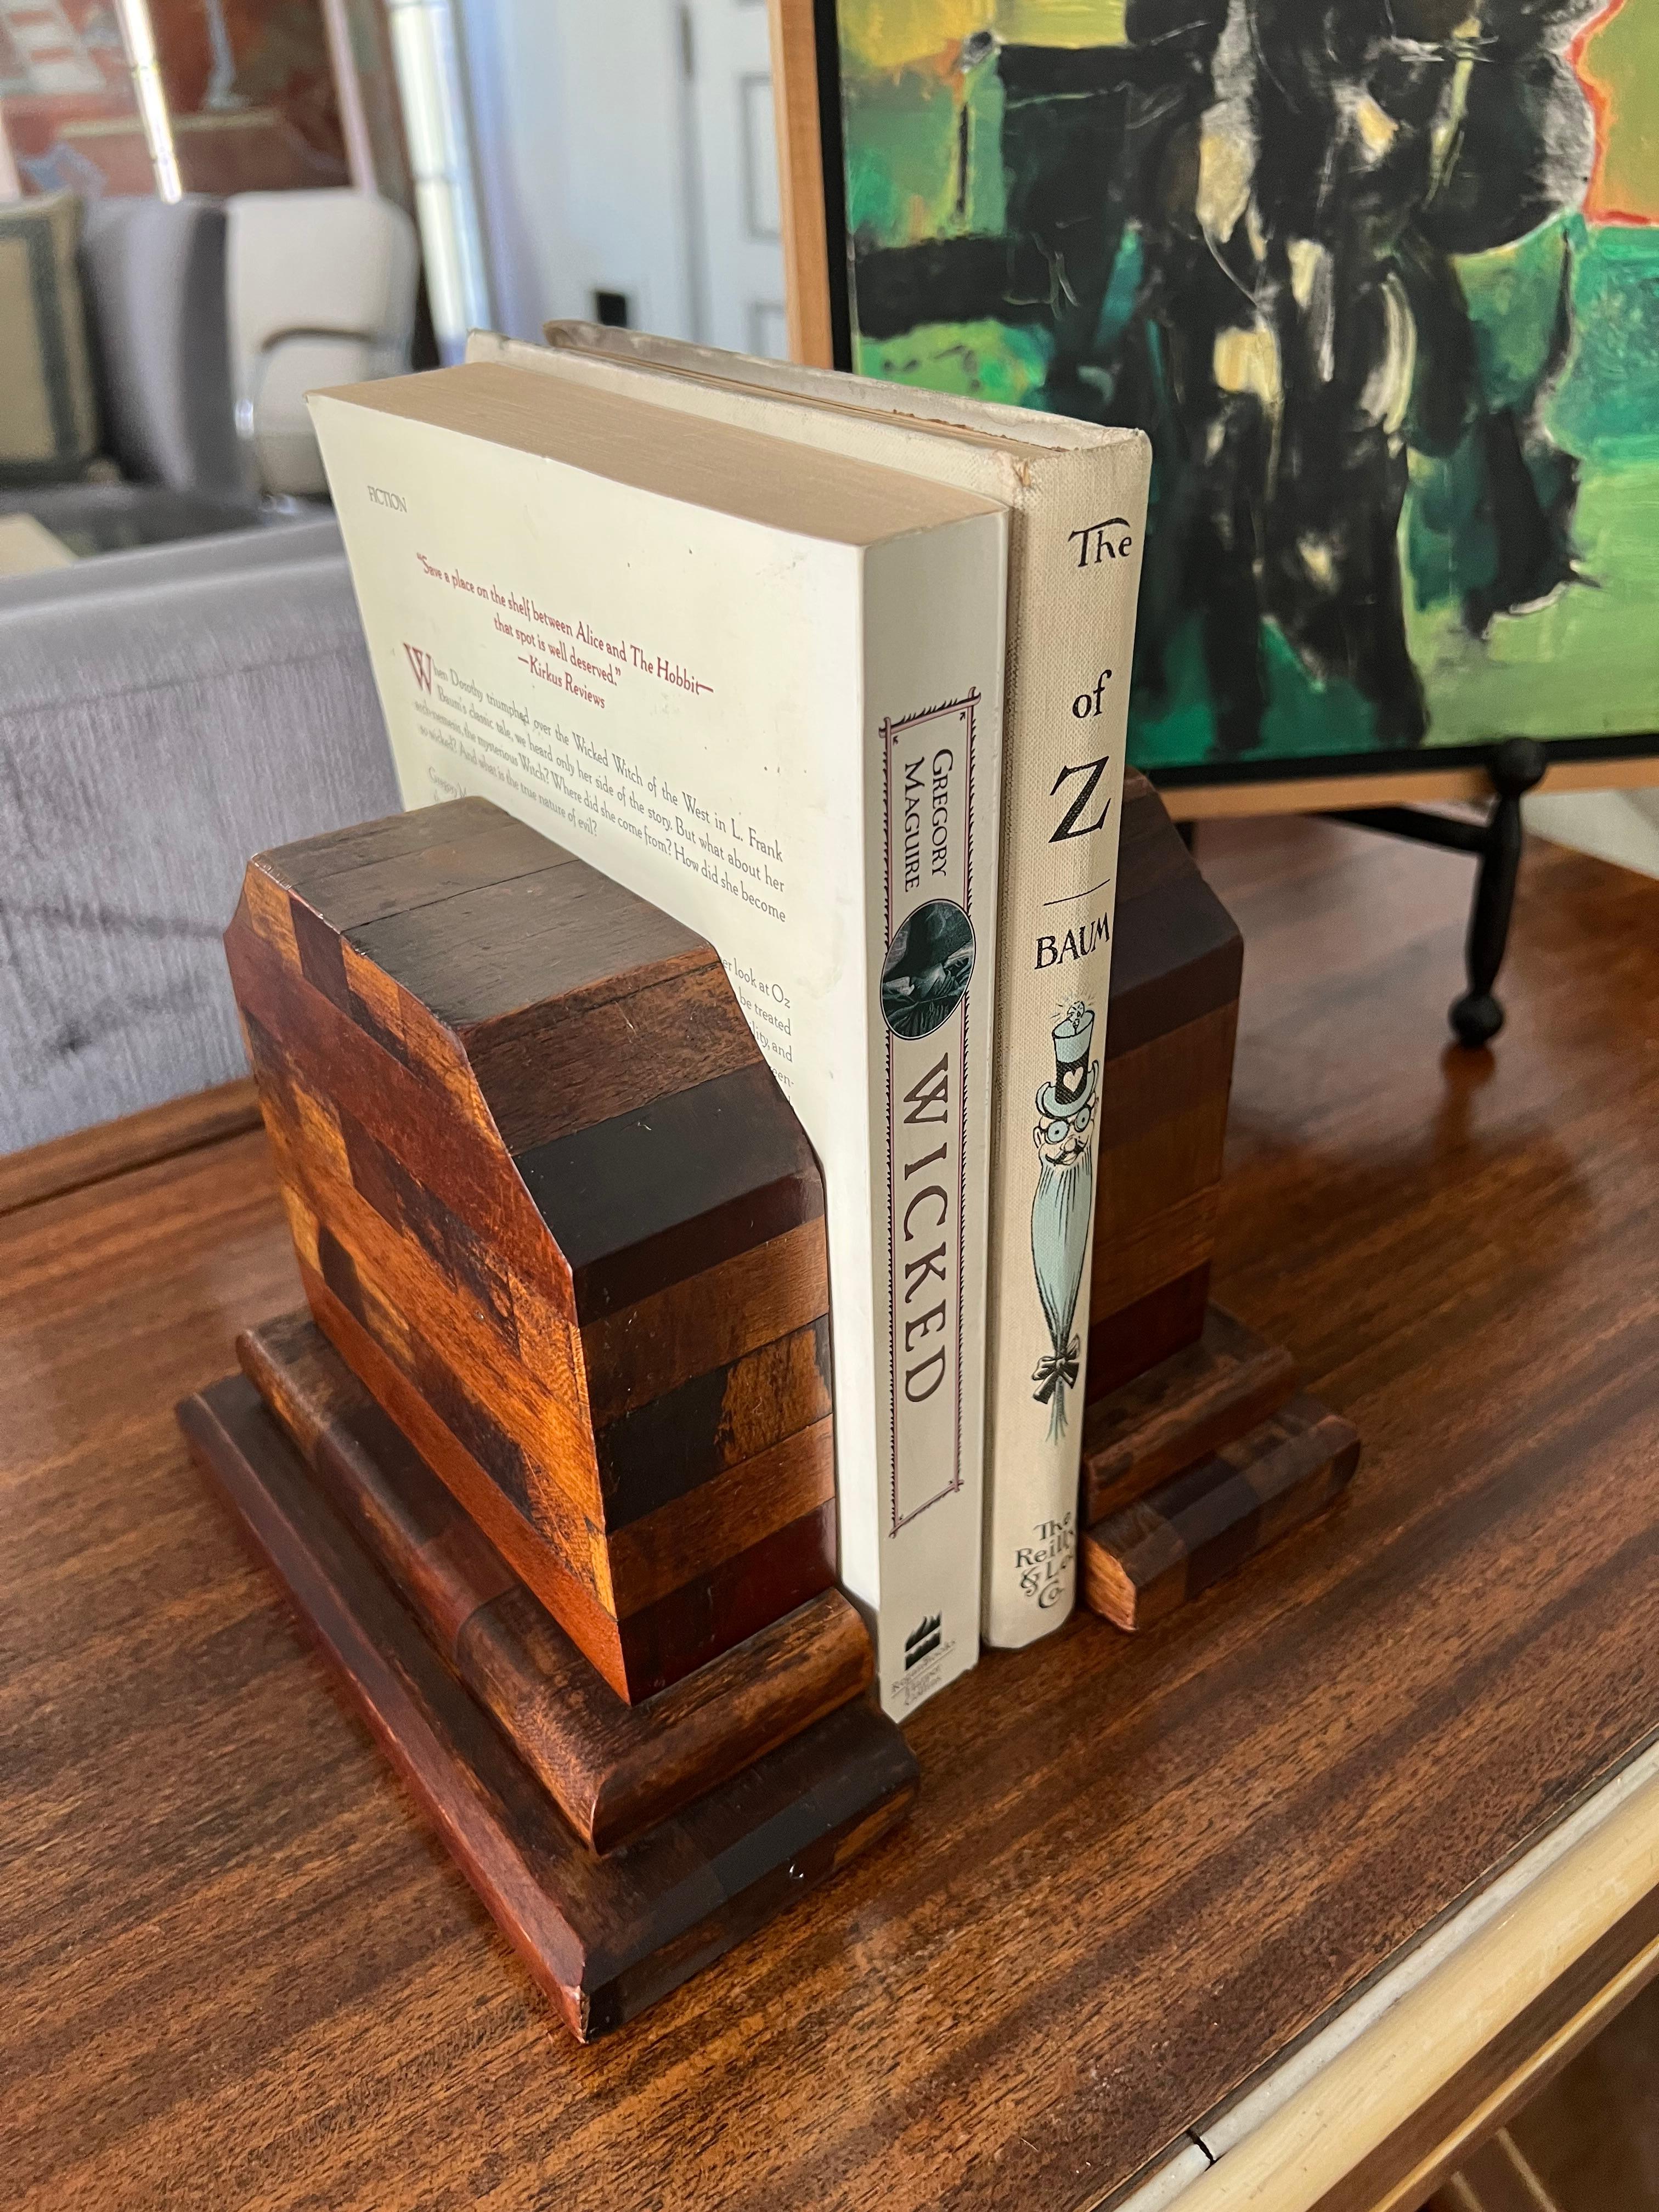 Pair of mixed-wood bookends. A compliment to any shelf or library. Reminiscent of Don Shoemaker - intricate attention to detail... A mosaic of rich wood colors, these bookends pair well with a variety of styles. These bookends are in great condition